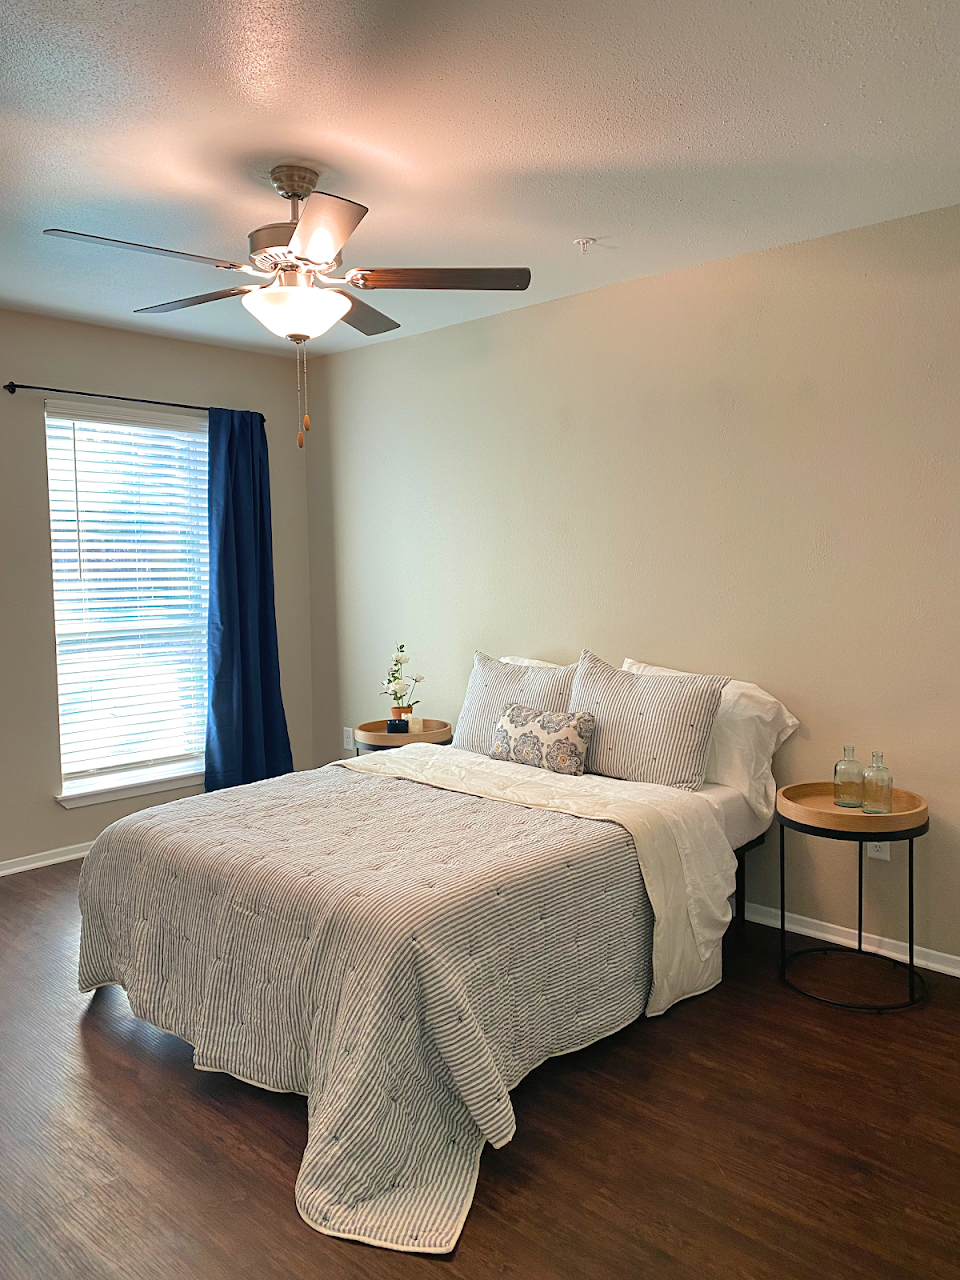 Photo of 333 HOLLY. Affordable housing located at 333 HOLLY COURT THE WOODLANDS, TX 77381